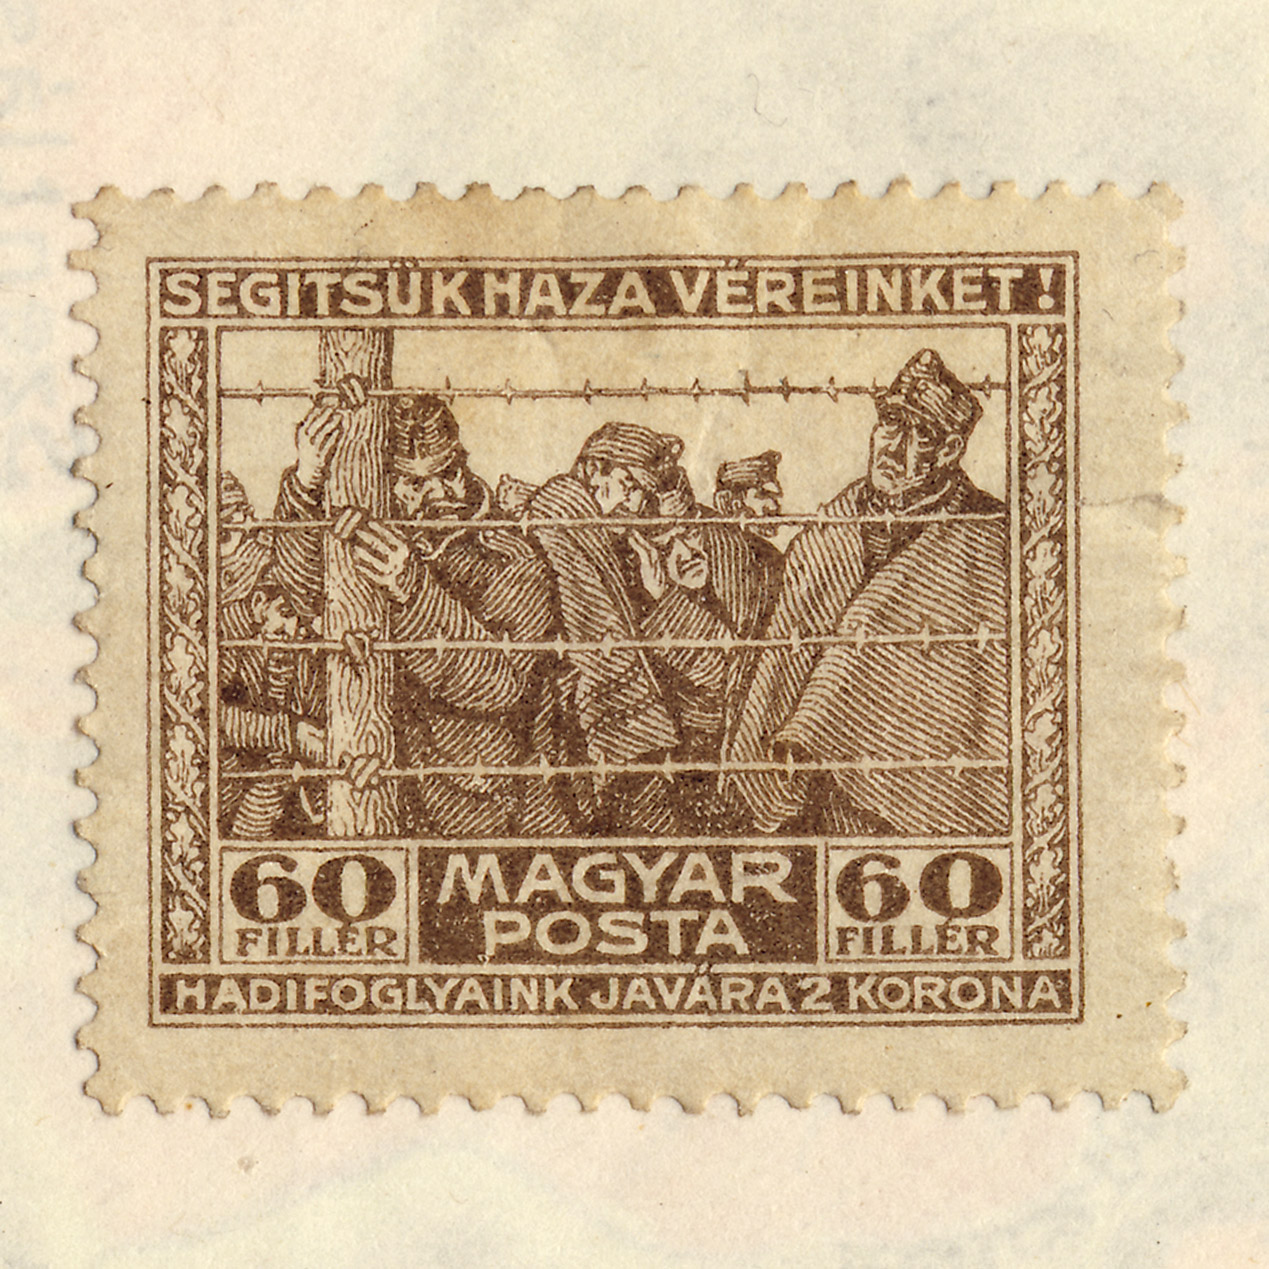 Hungarian stamp of the war-prisoners' help